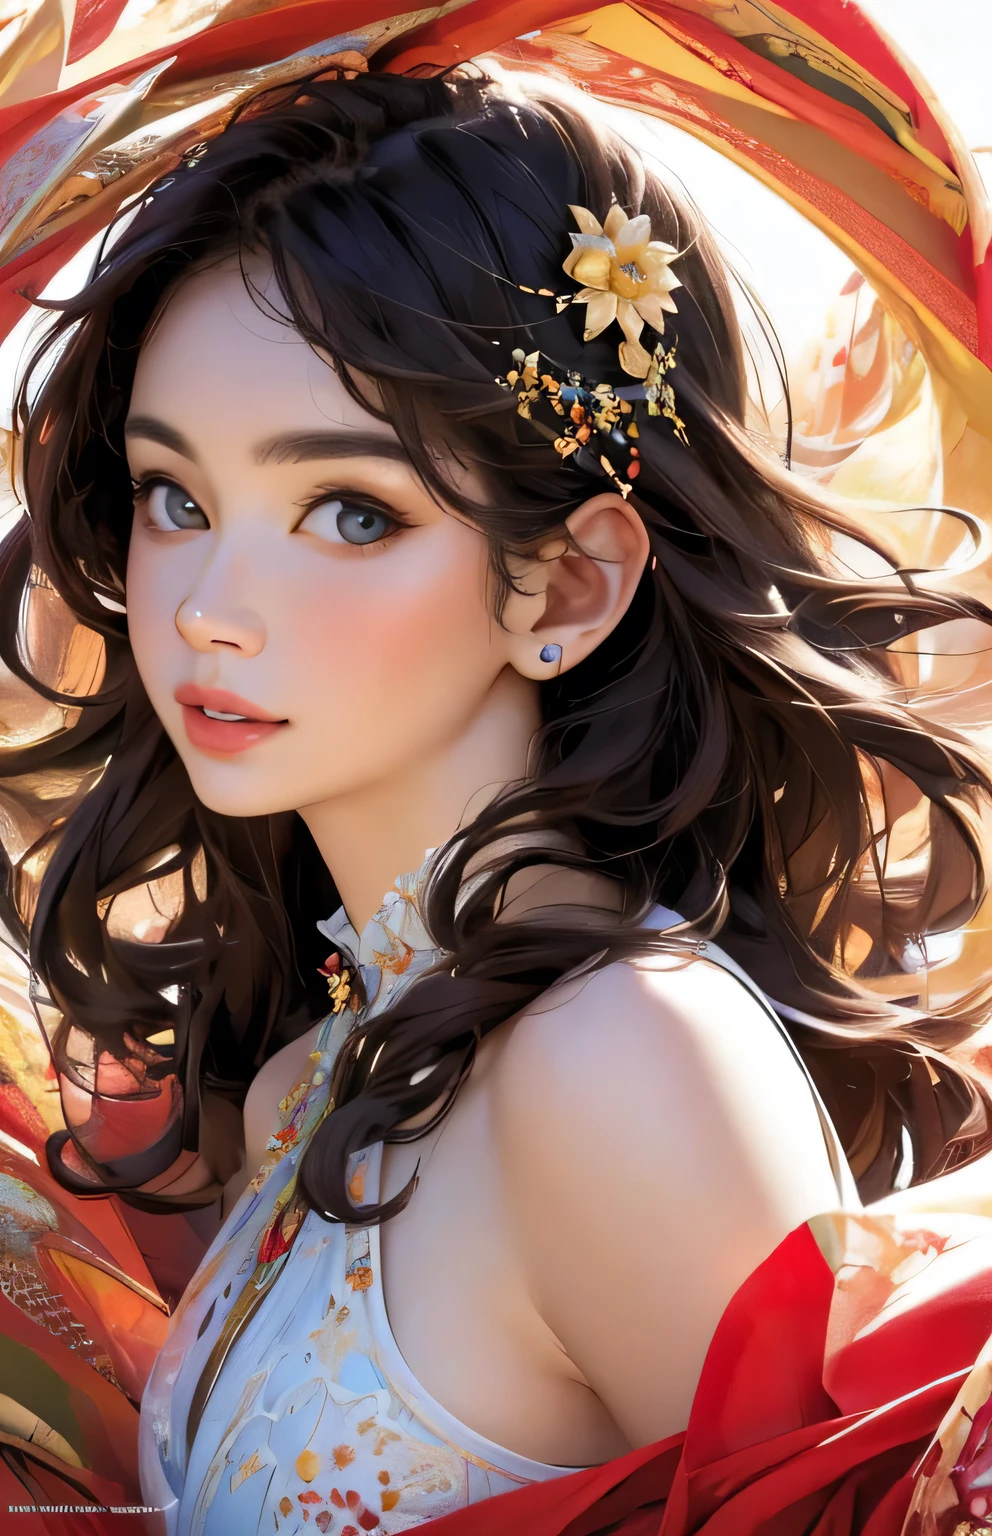 (Masterpiece, Best Quality, Top Quality, Official Art, Beautiful and Aesthetic: 1.2), (One Girl), Accurate Anatomy, Beautiful Face, Detailed and Perfect Face, Big Eyes, Very Detailed, (Fractal Art: 1.3 ), colorful, the best details, refreshing sex appeal, neat, cute, lively spring image paintings,